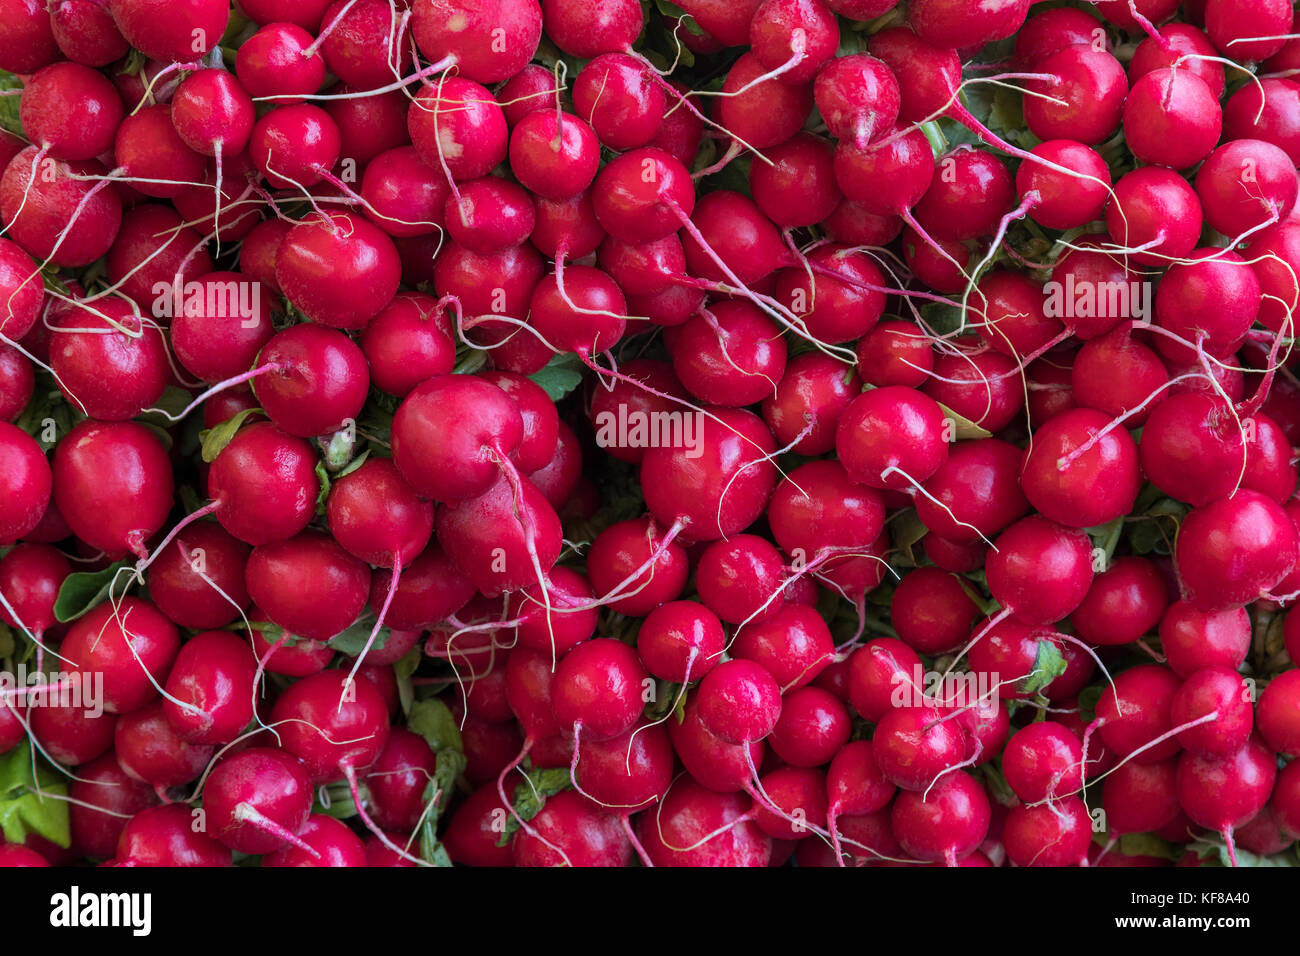 Radishes - an edible root vegetable of the Brassicaceae family . Radishes are grown and eaten throughout the world, mostly raw as a crunchy salad vege Stock Photo